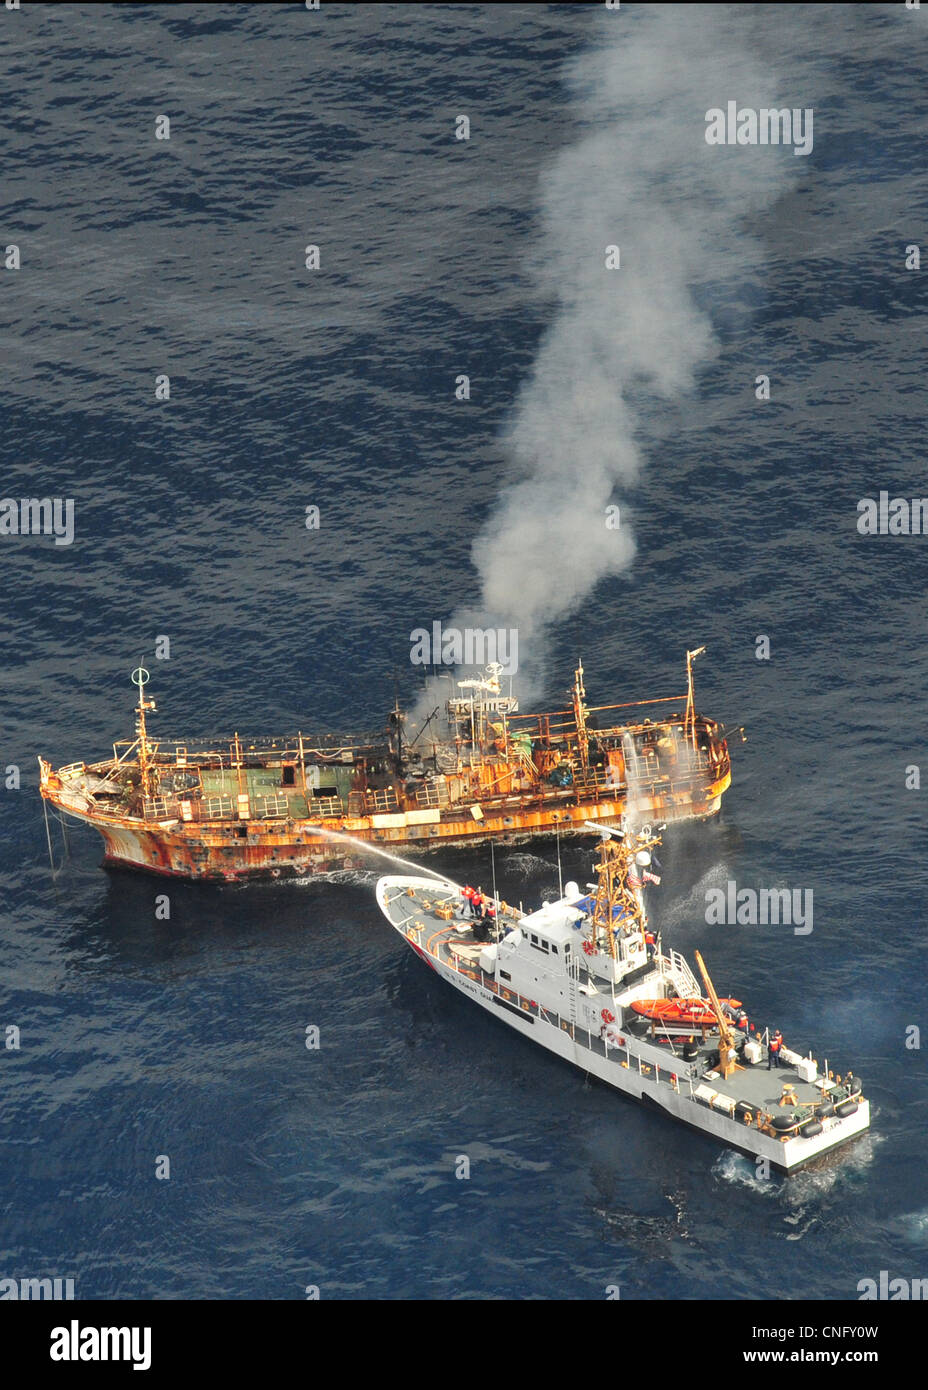 The Japanese fishing vessel Ryou-Un Maru burns after the US Coast Guard Cutter Anacapa (right) fired on it with explosive ammunition April 5, 2012 in the Gulf of Alaska. The trawler known as the ghost ship has been floating across the Pacific after being cast to sea by the magnitude 9.0 earthquake a Stock Photo